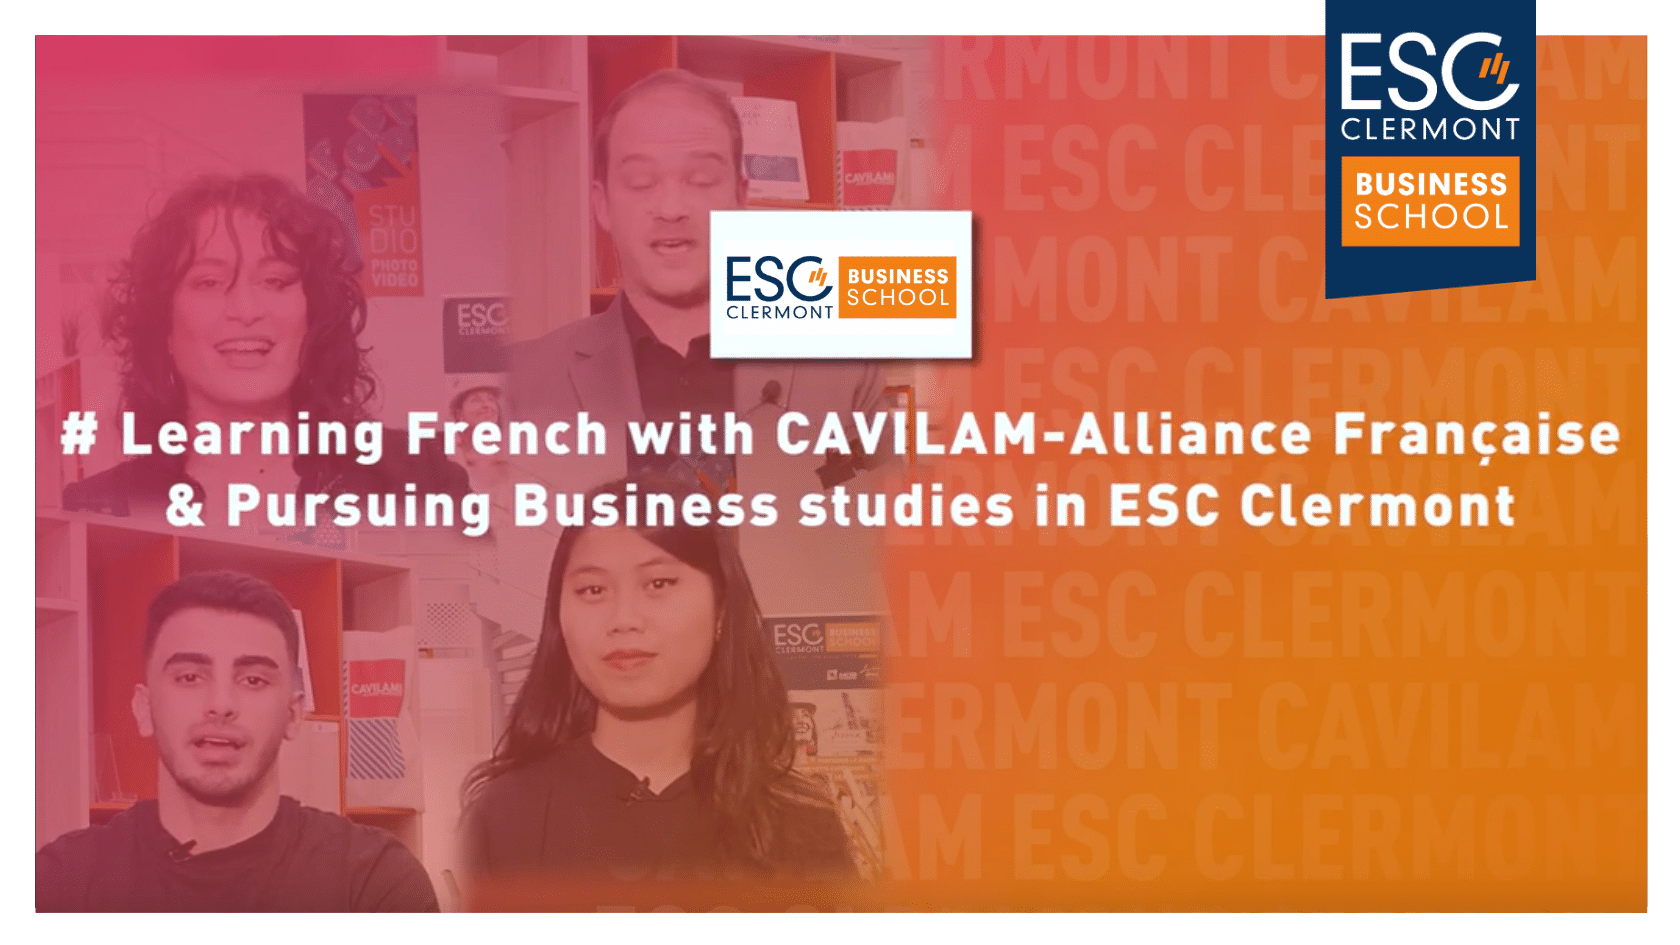 Learn French with Cavilam